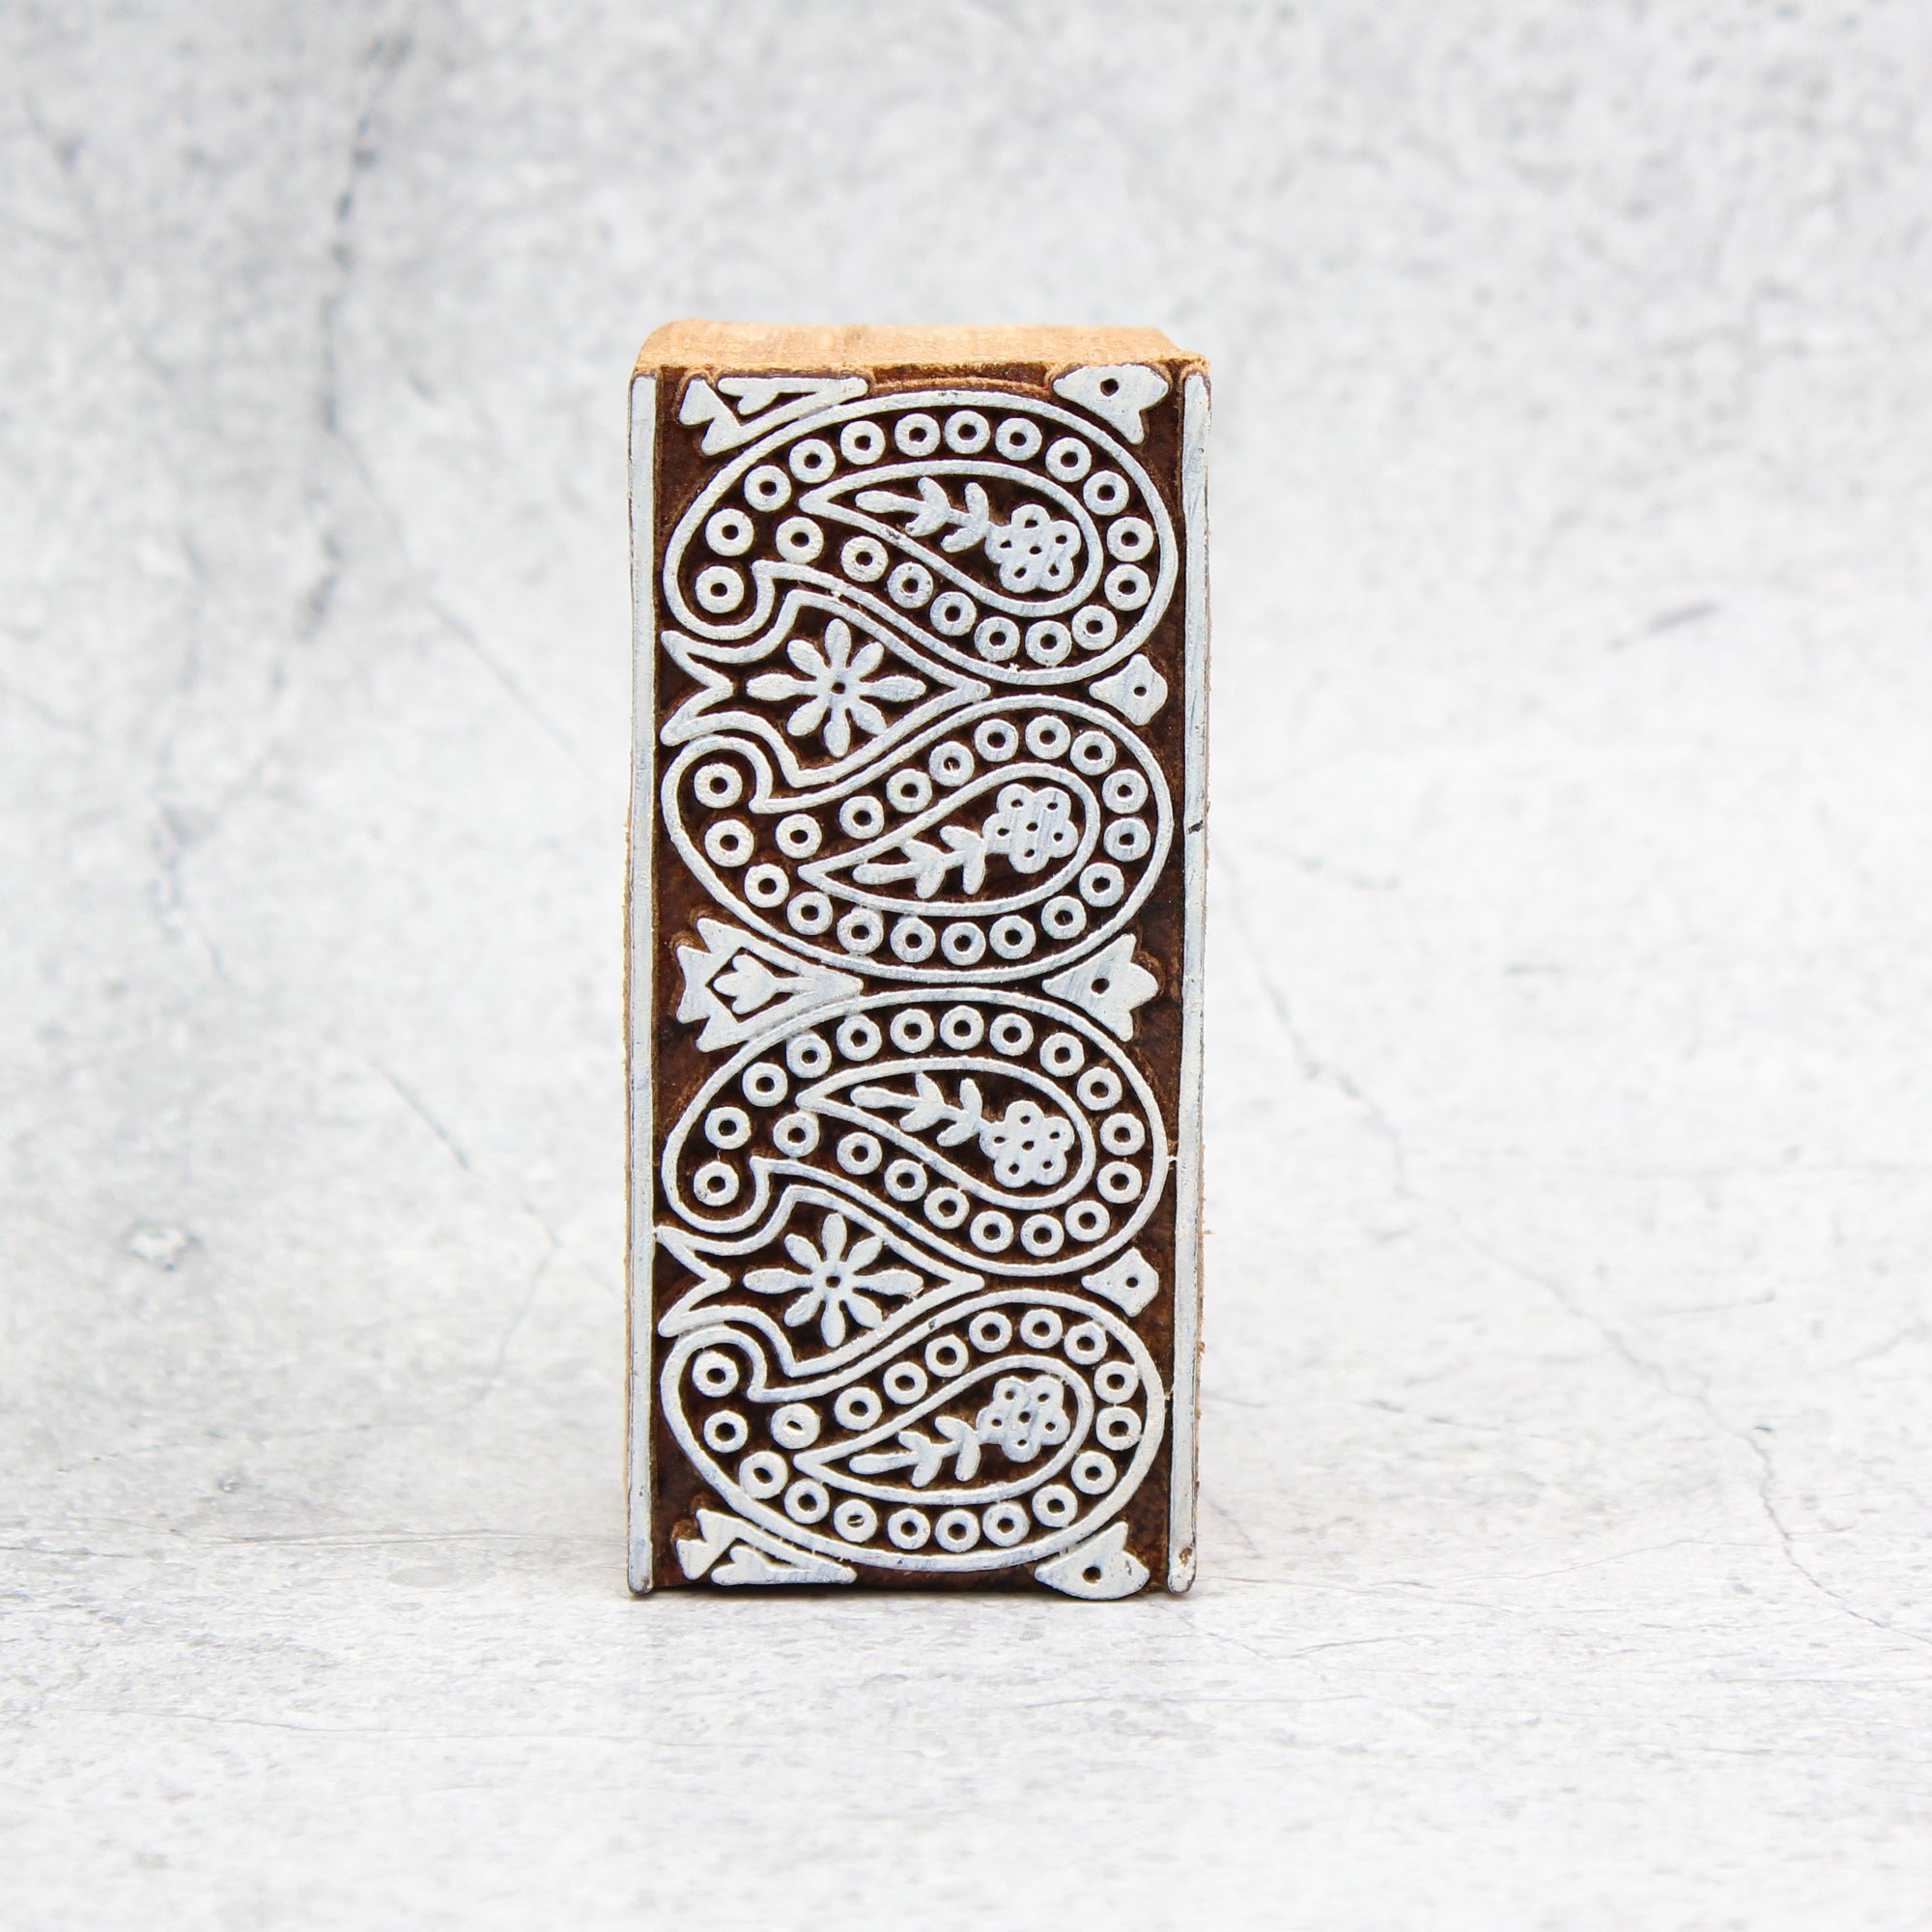 Hand Carved Wooden Printing Block Paisley Border W 1.5inch X L 4inch 1pc